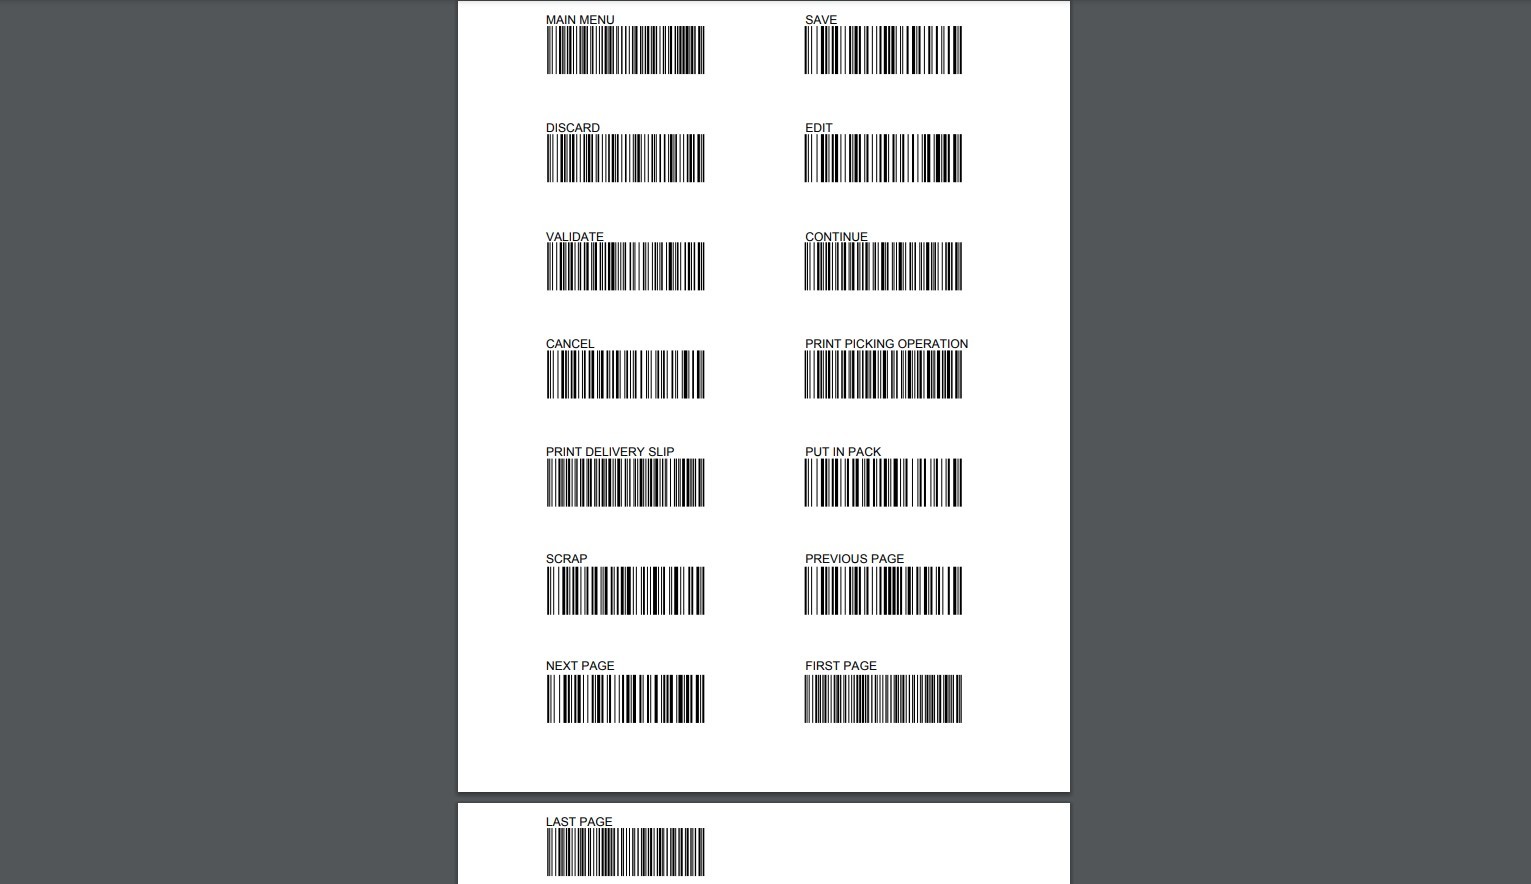 Actions on the transfer slip replaced by the barcodes